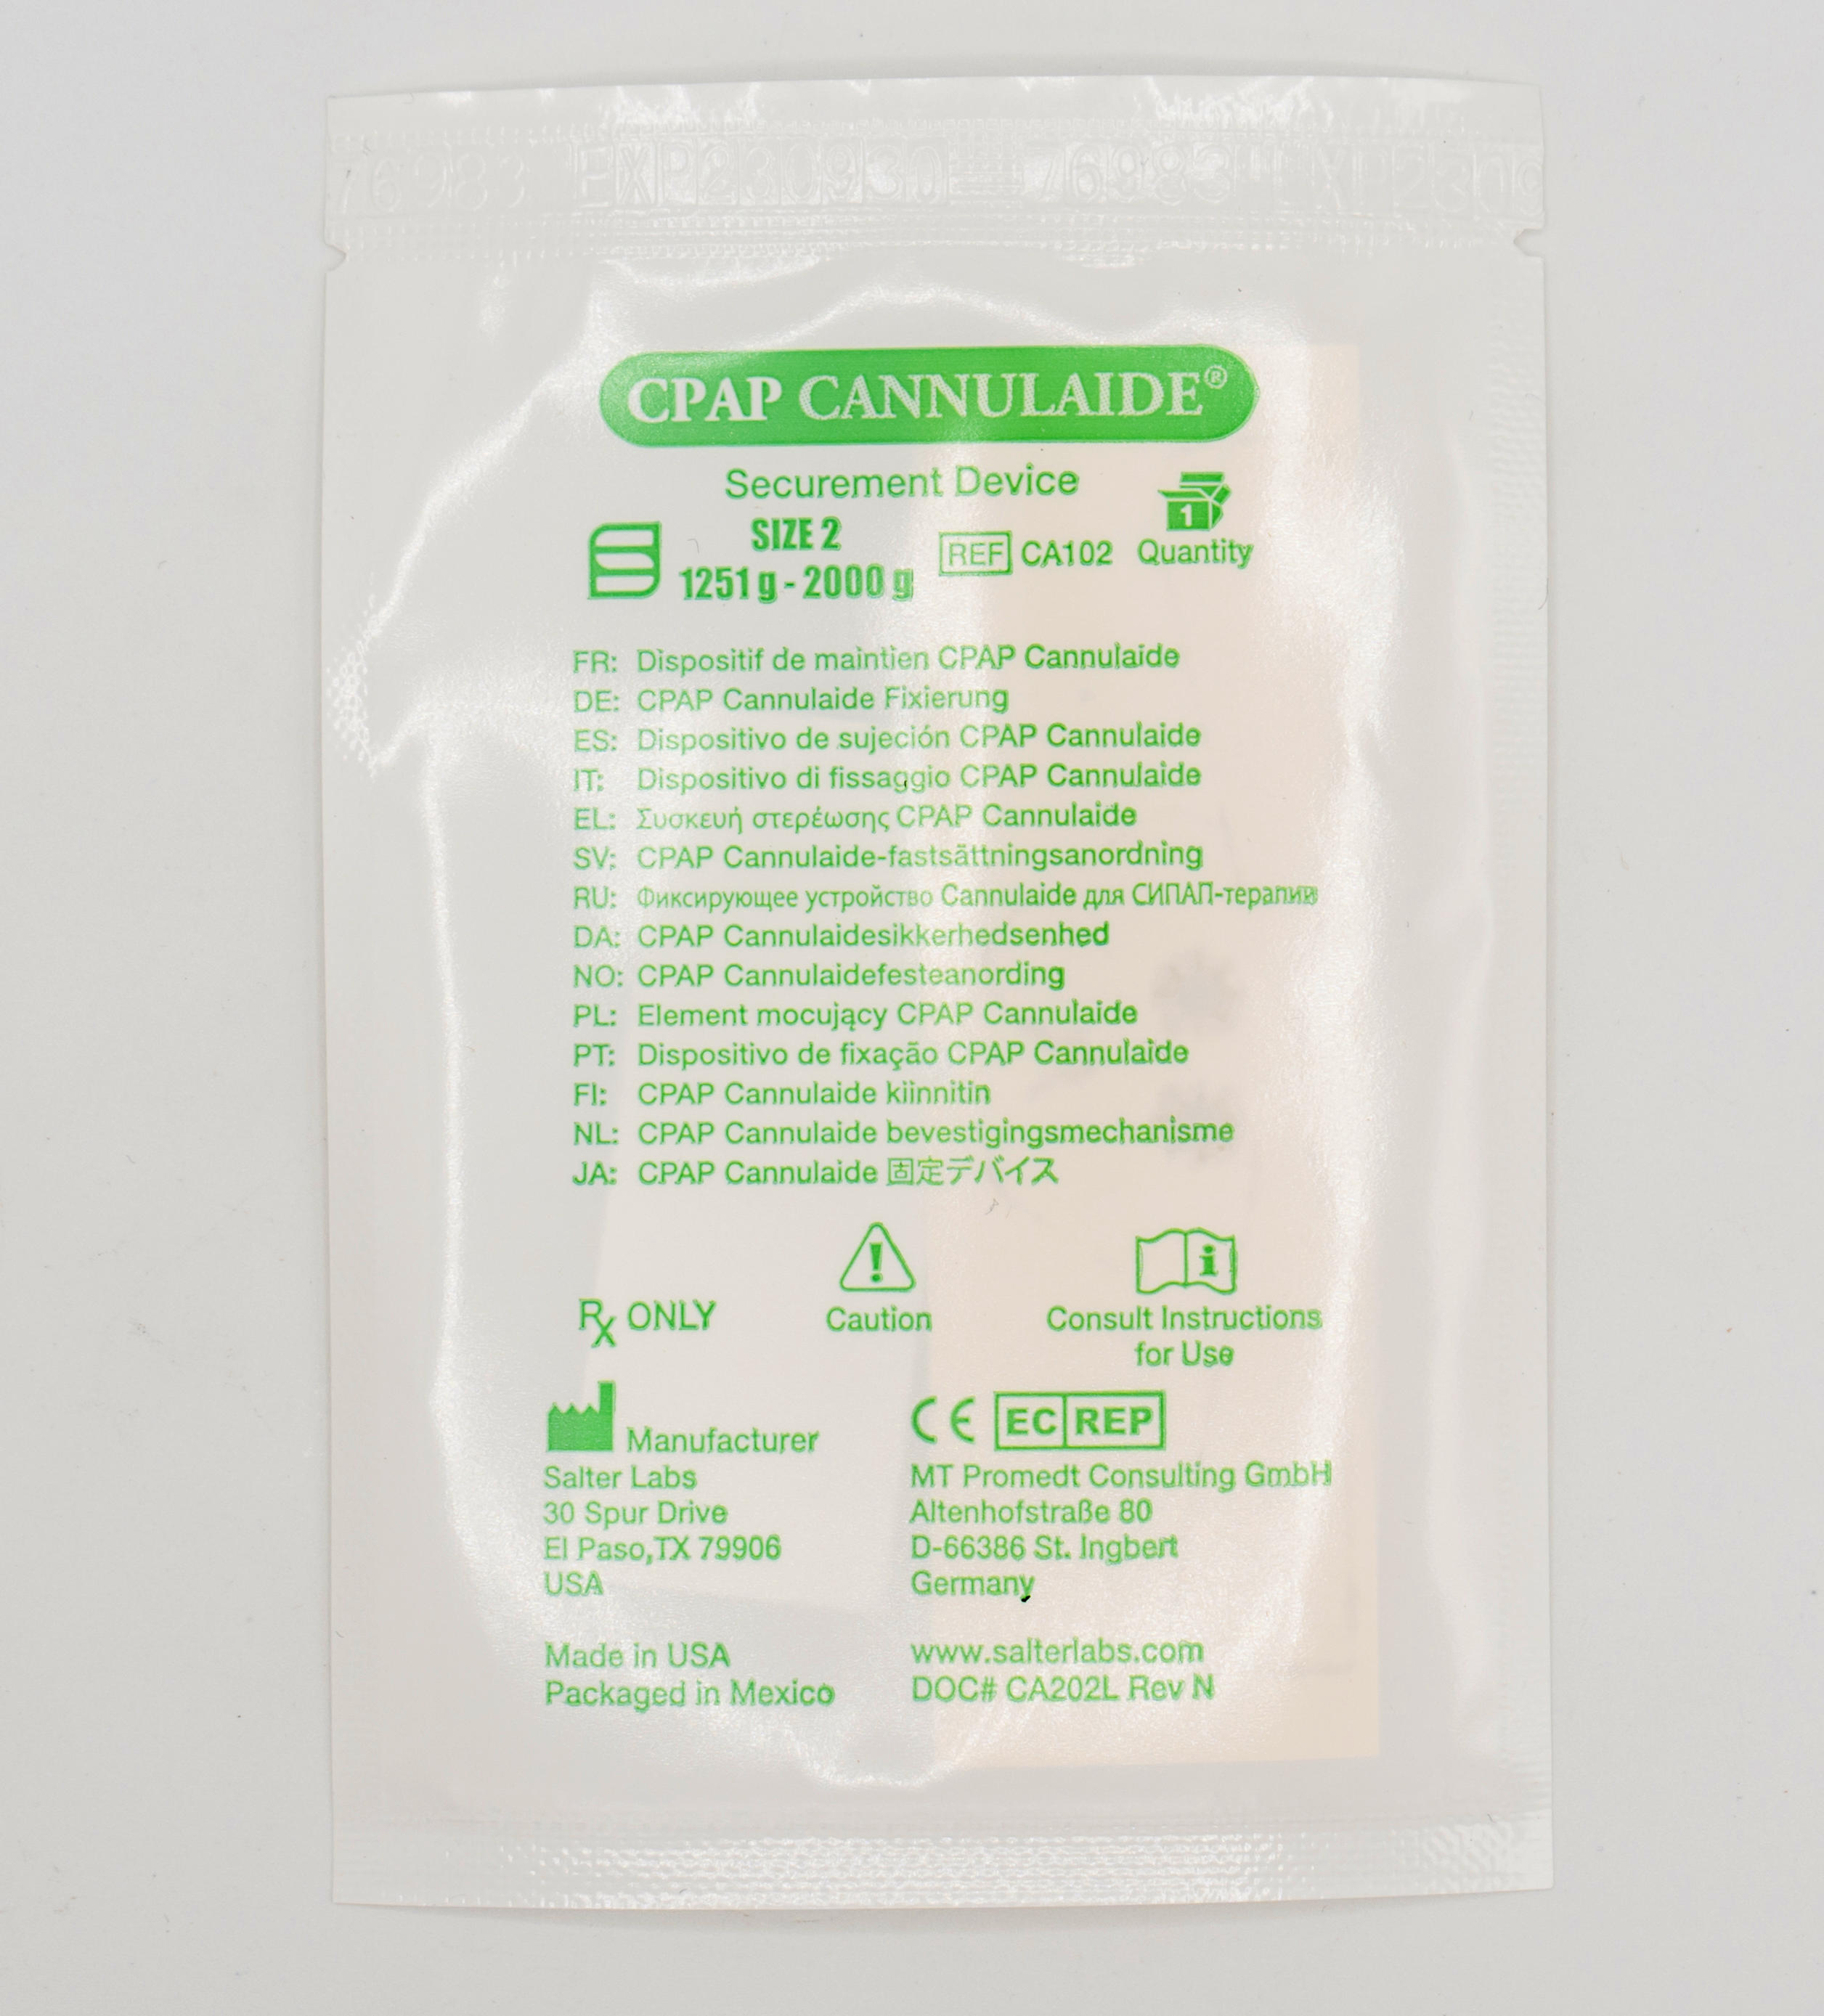 CPAP Cannulaide® Securement Device CA102-0-25 | Size 2, for babies 1251-2000g